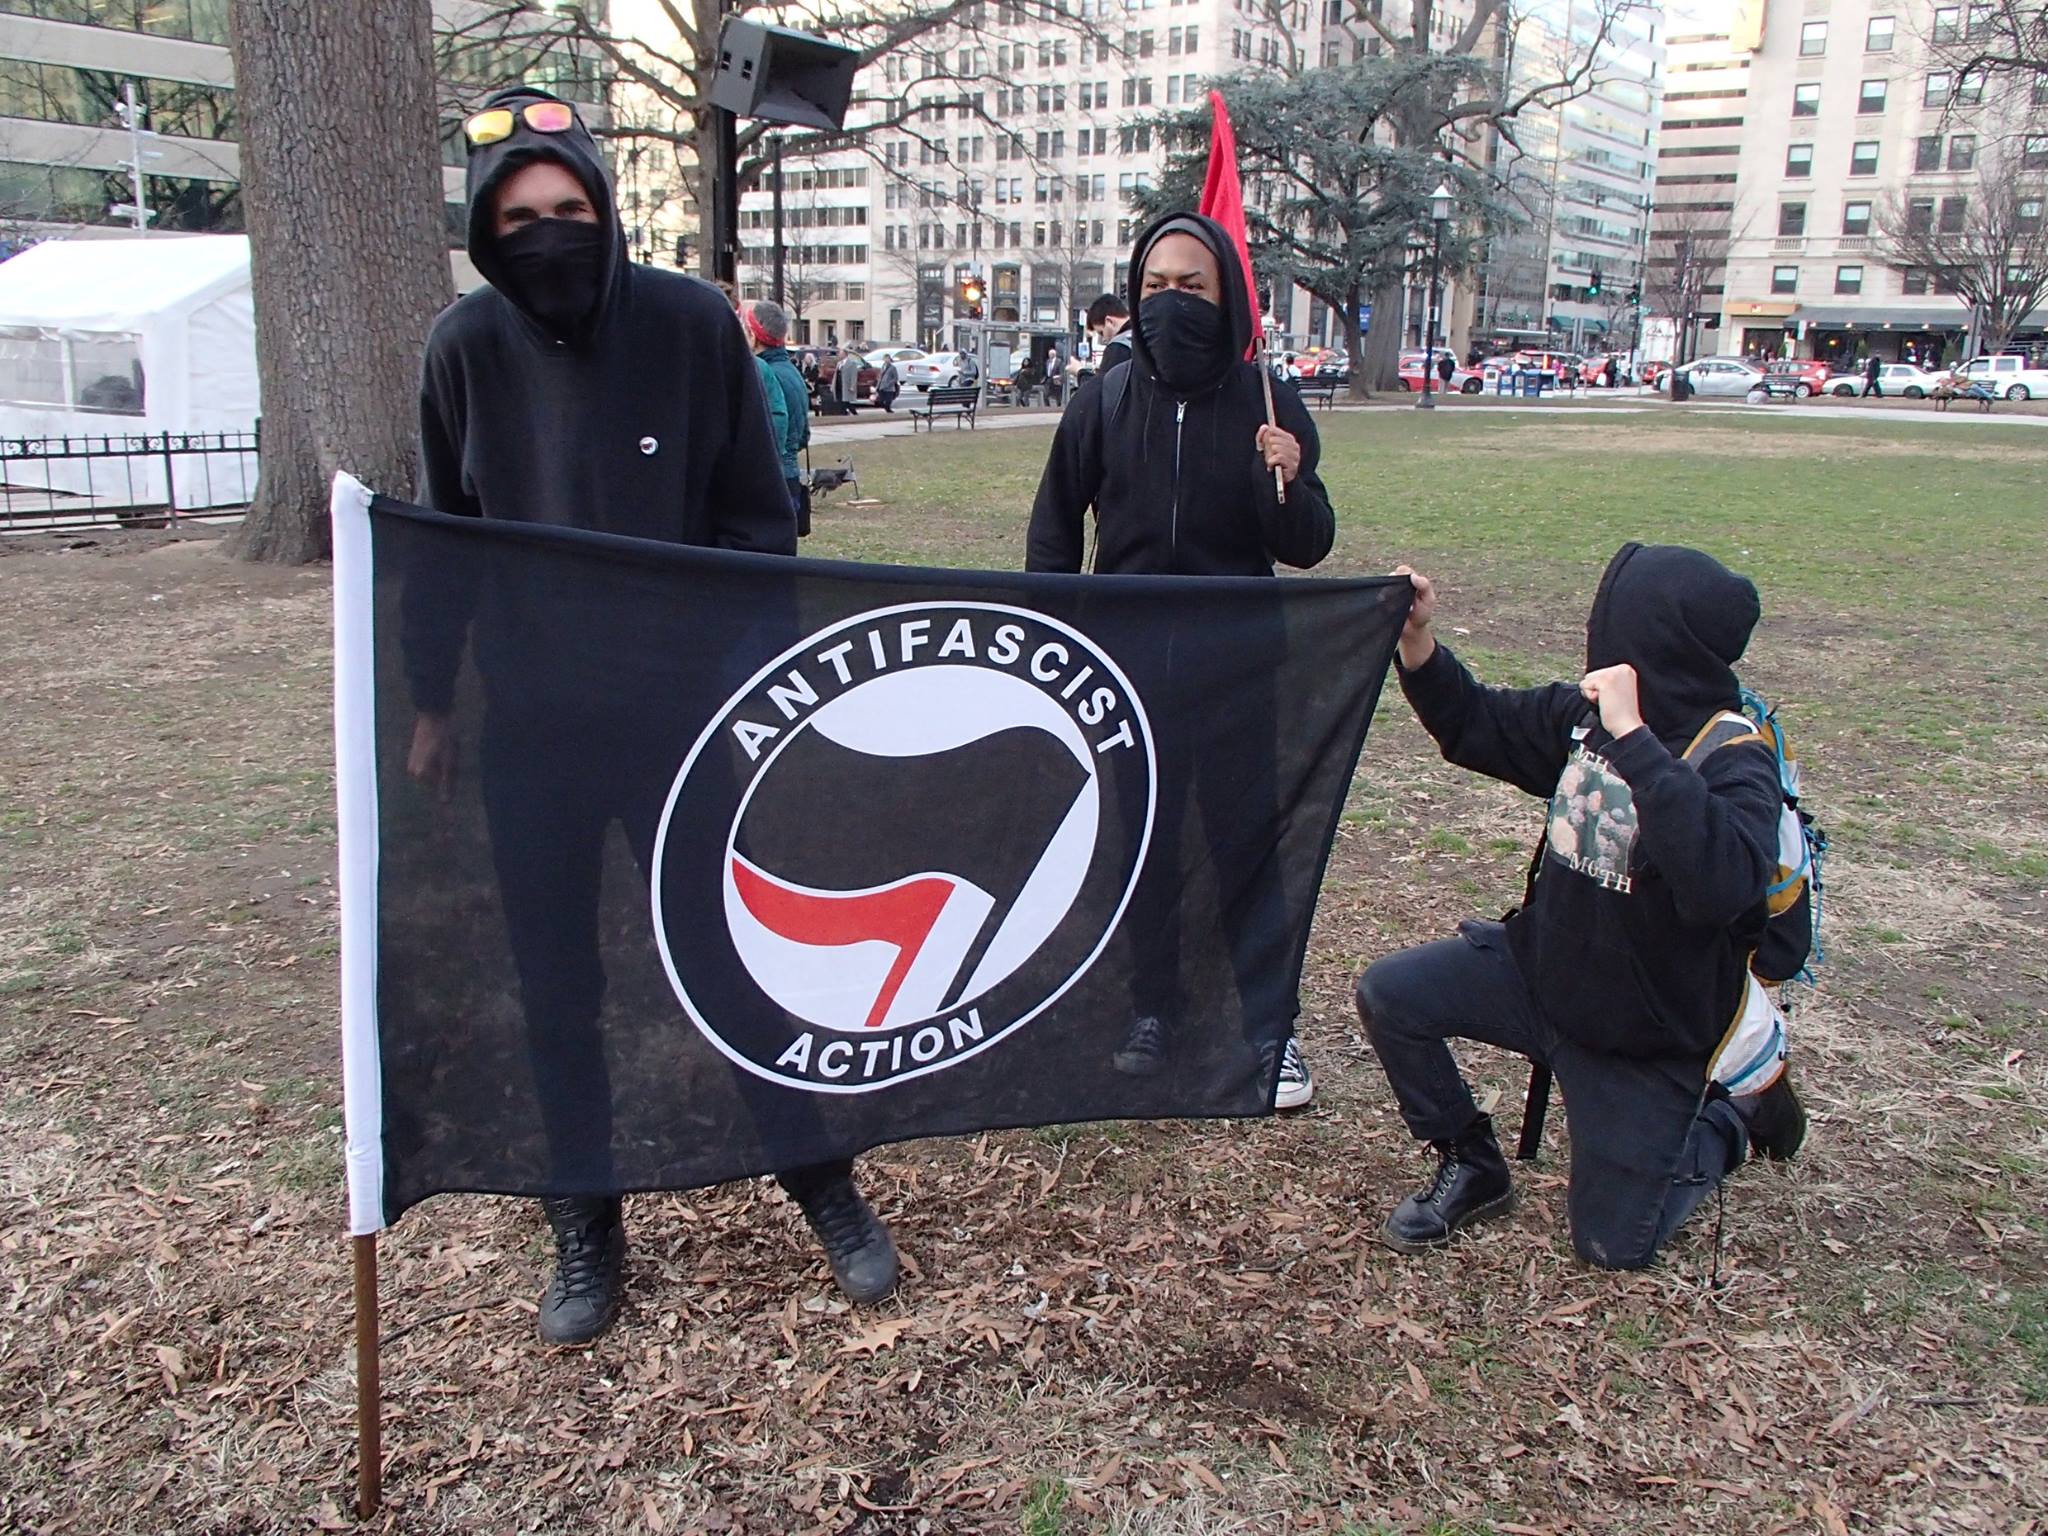 These anarchist Black Bloc guys were just hanging around. But the Franklin Square group's protest was peaceful and they weren't interested in damaging property or disrupting the inauguration — just in making a point about the dangers of nuclear power and weapons.